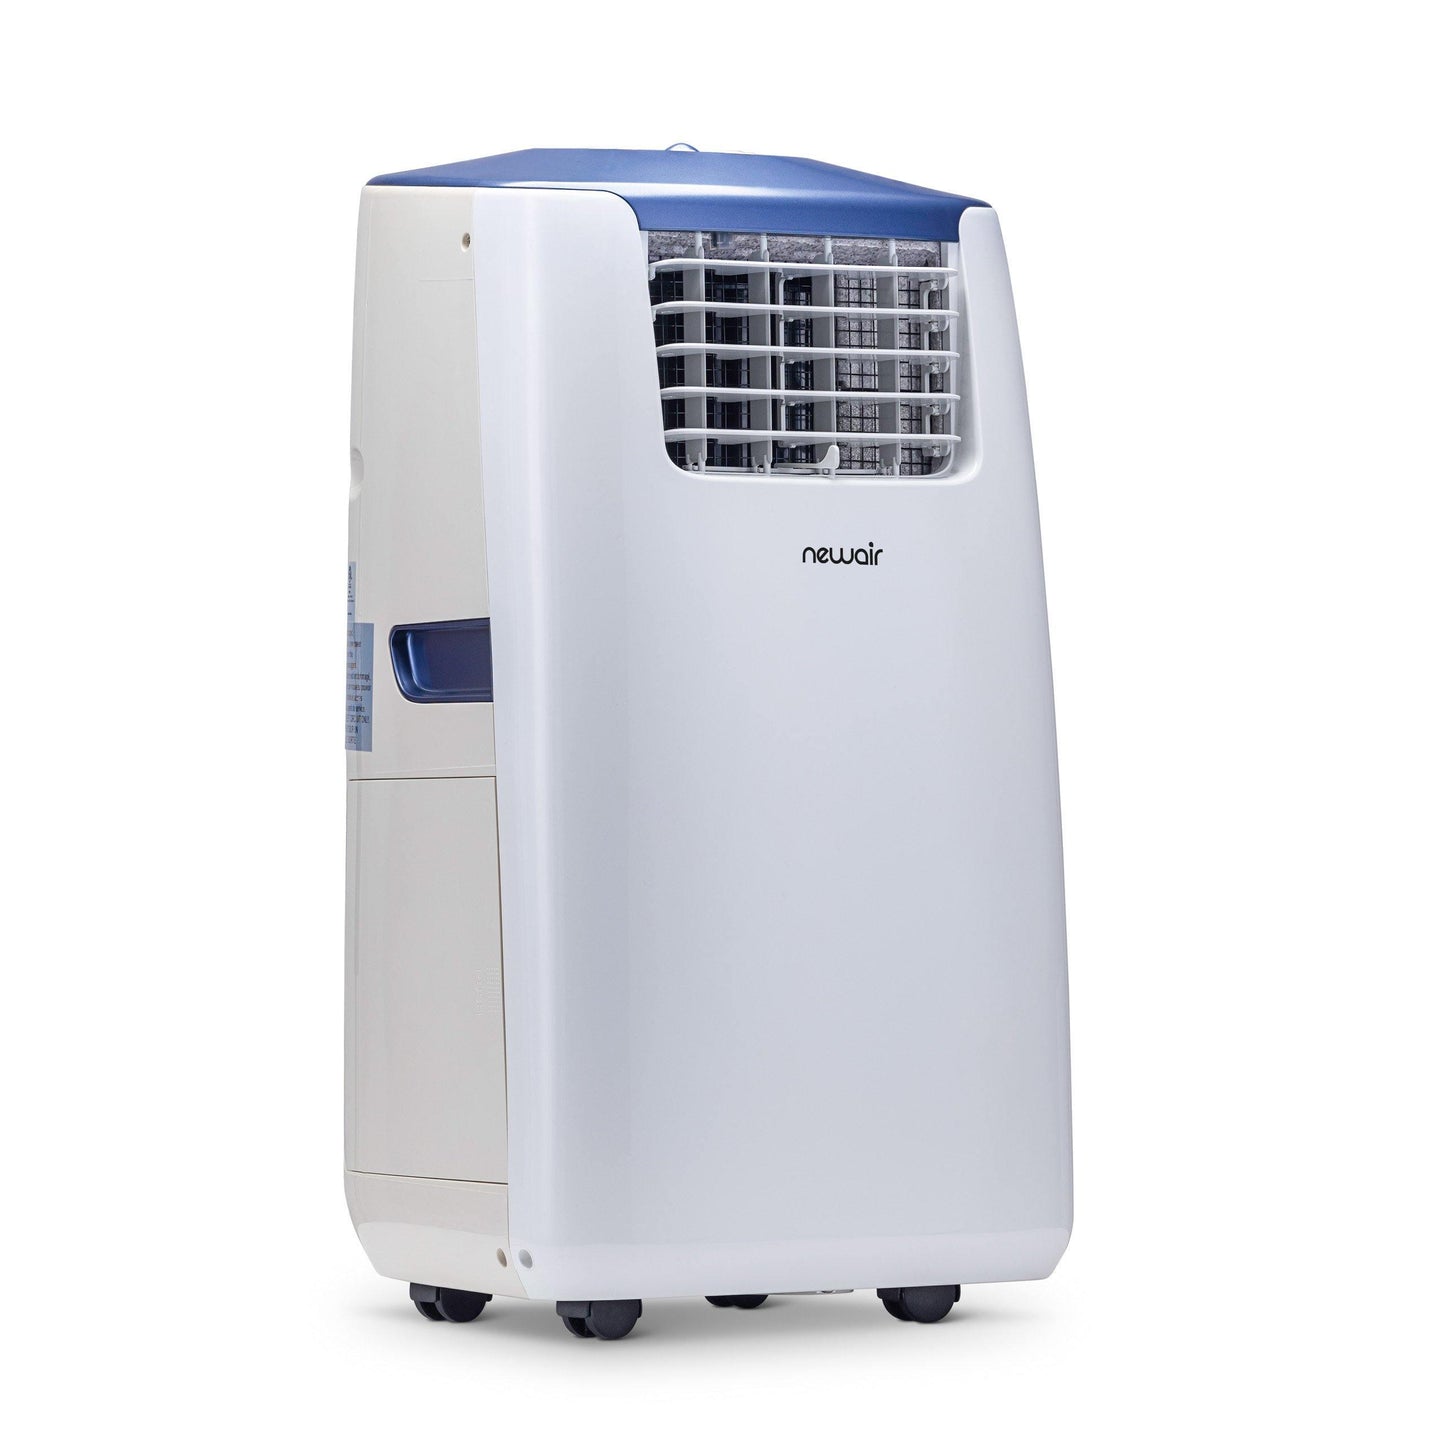 Newair Portable Air Conditioner, 14,000 BTUs, Easy Setup Window Venting Kit and Remote Control SKU AC-14100E - Elite Air Purifiers/Creating Legacy Investments LLC